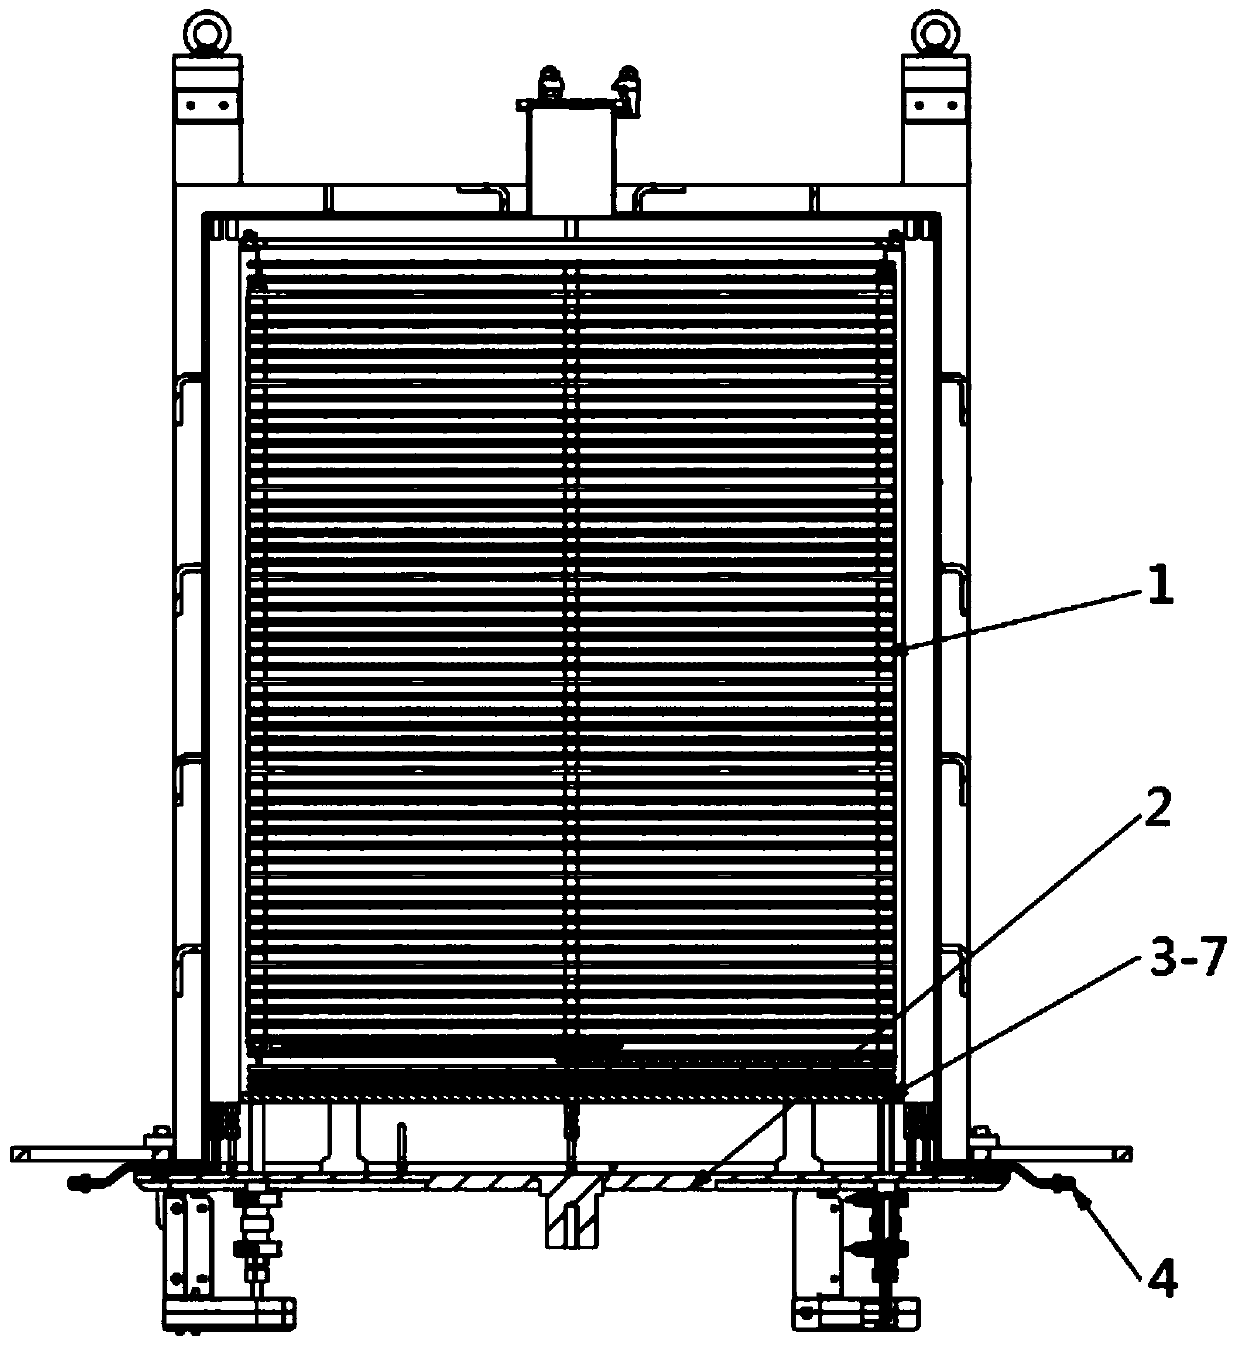 Machine equipment of semiconductor or photovoltaic material